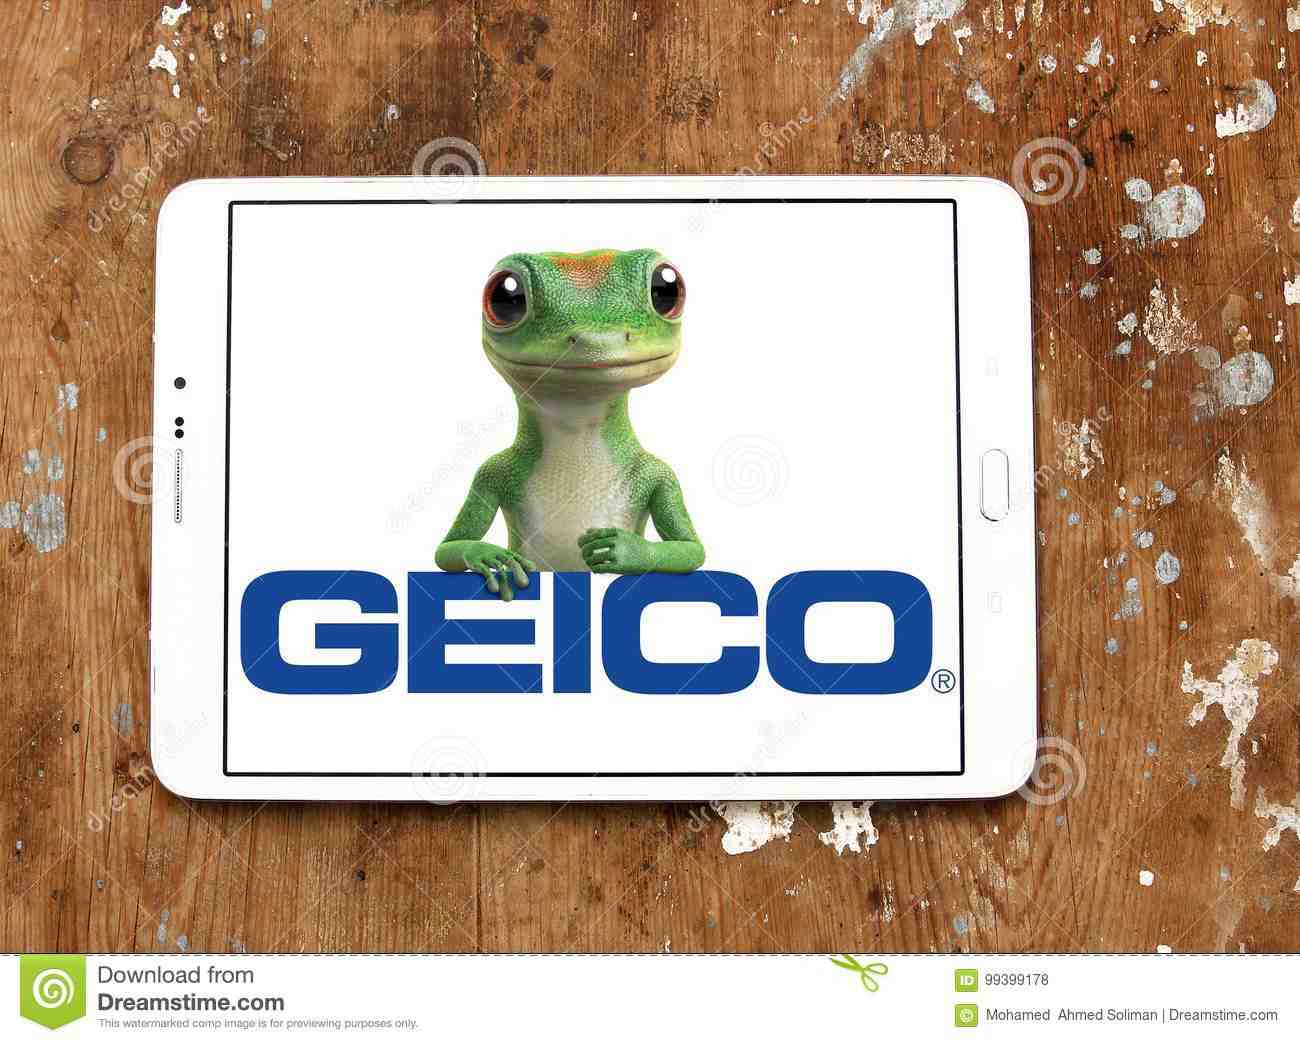 Can GEICO save you 15?